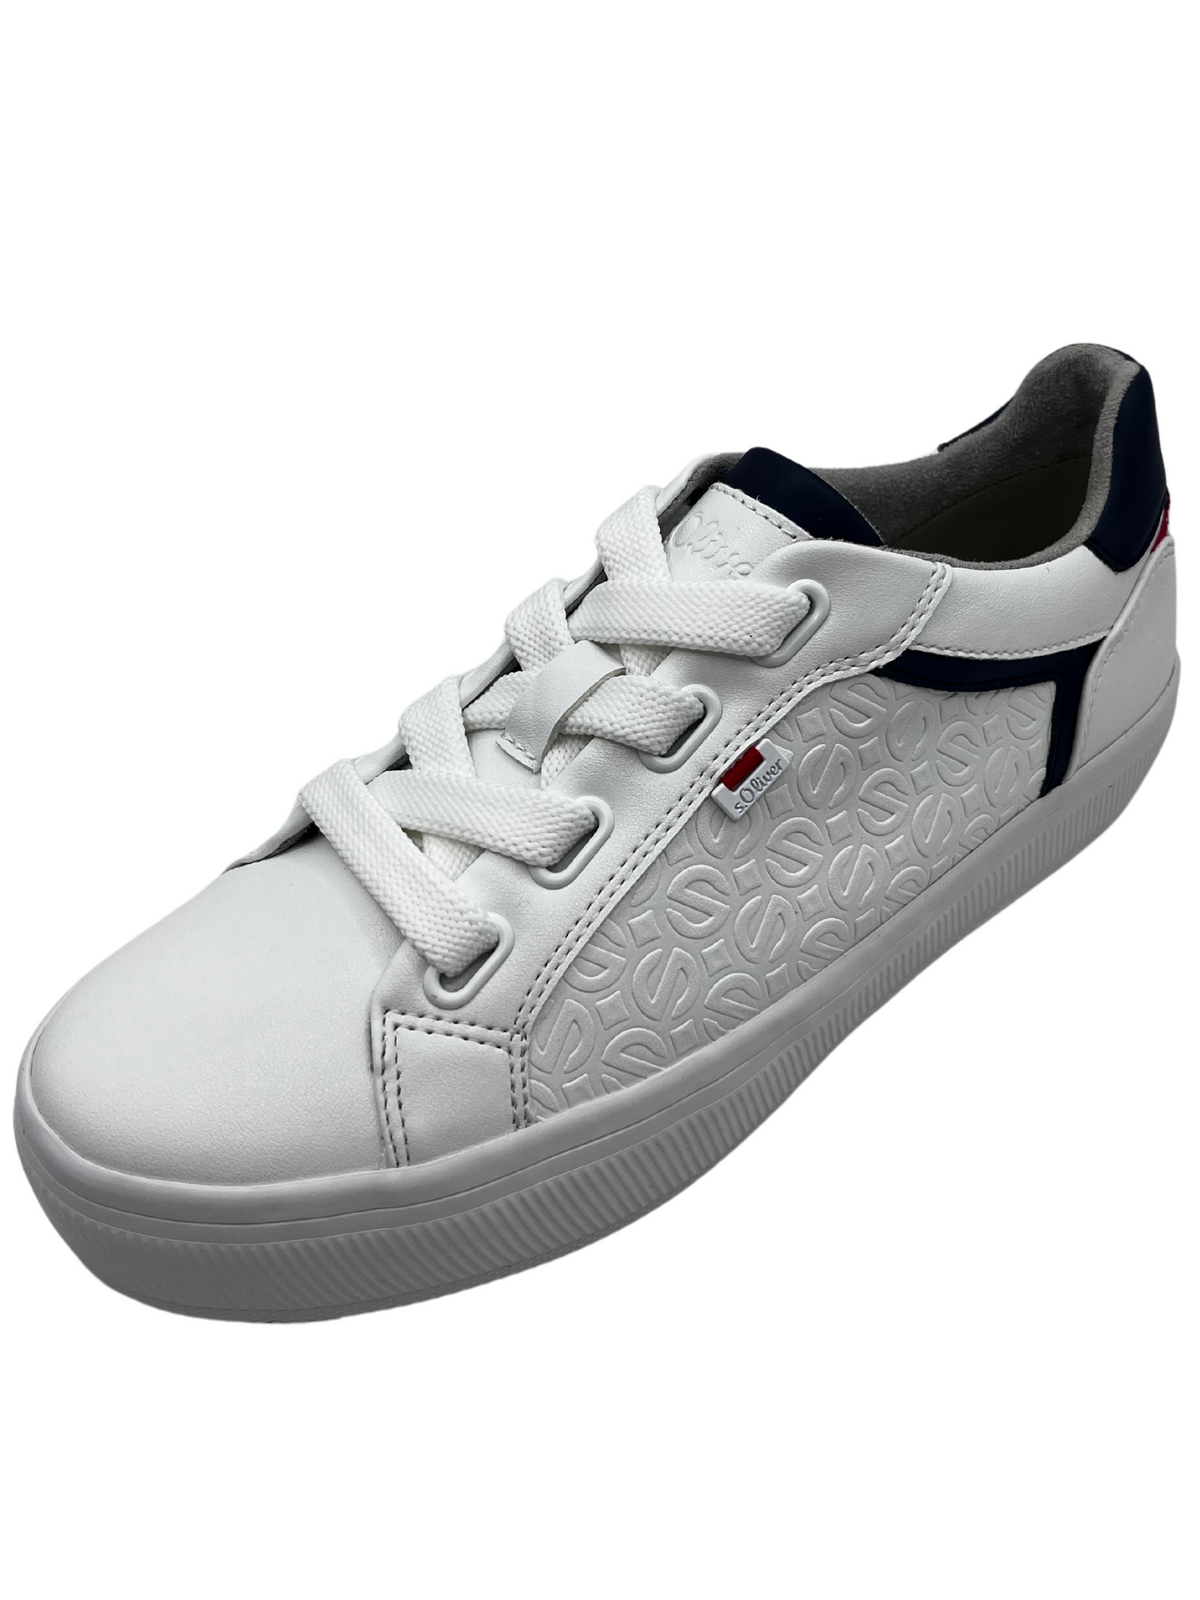 S Oliver White Trainer With Navy Details And Side Design